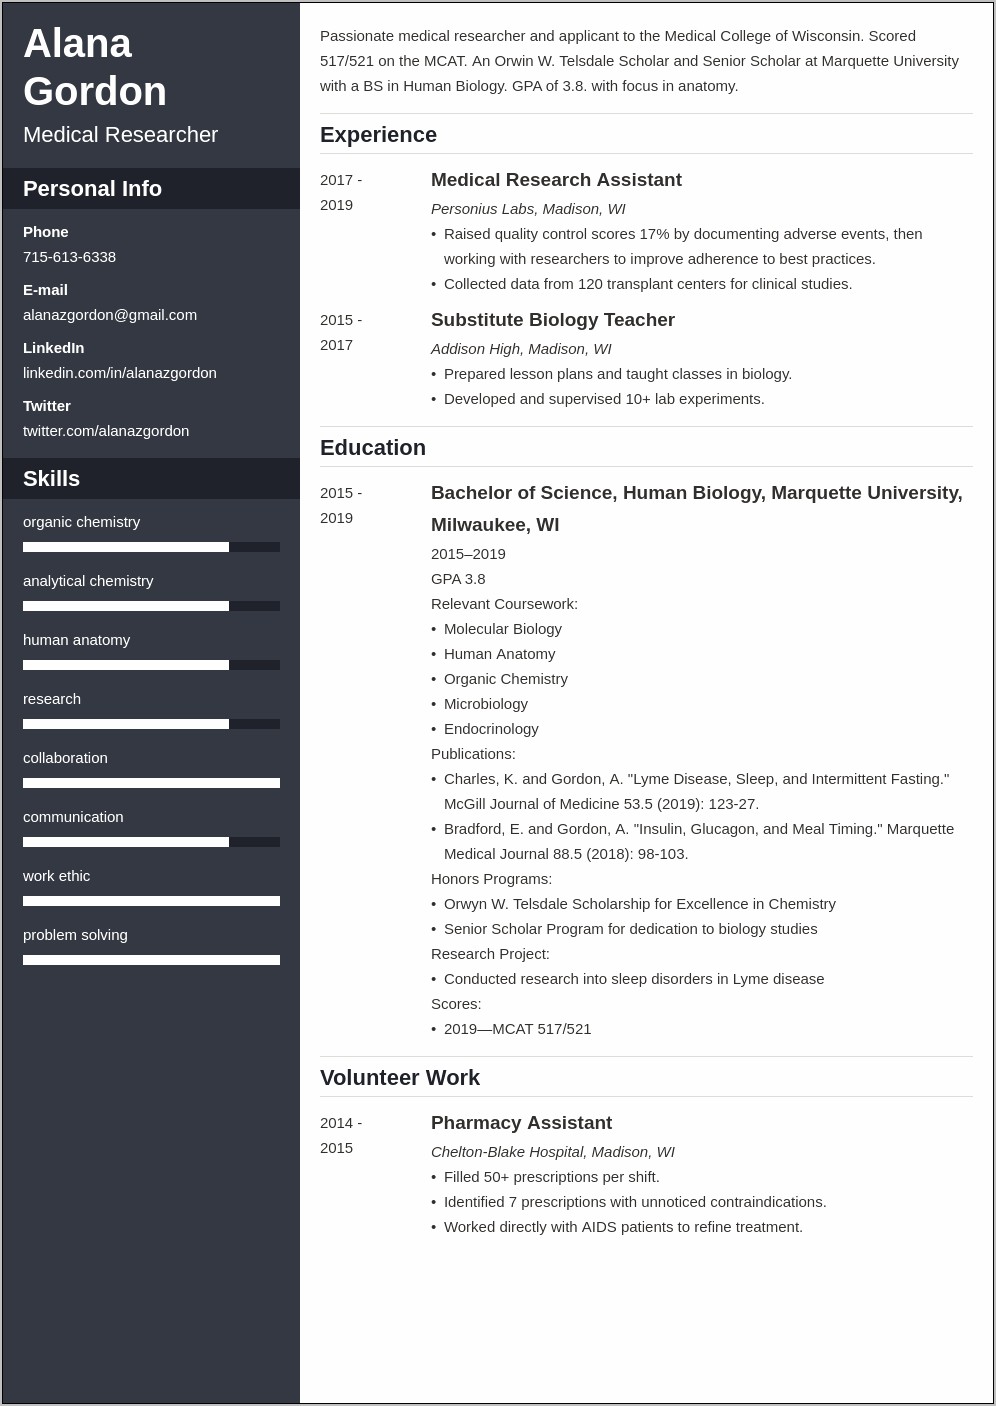 Sample Jhu Medical School Resume For Accepted Students